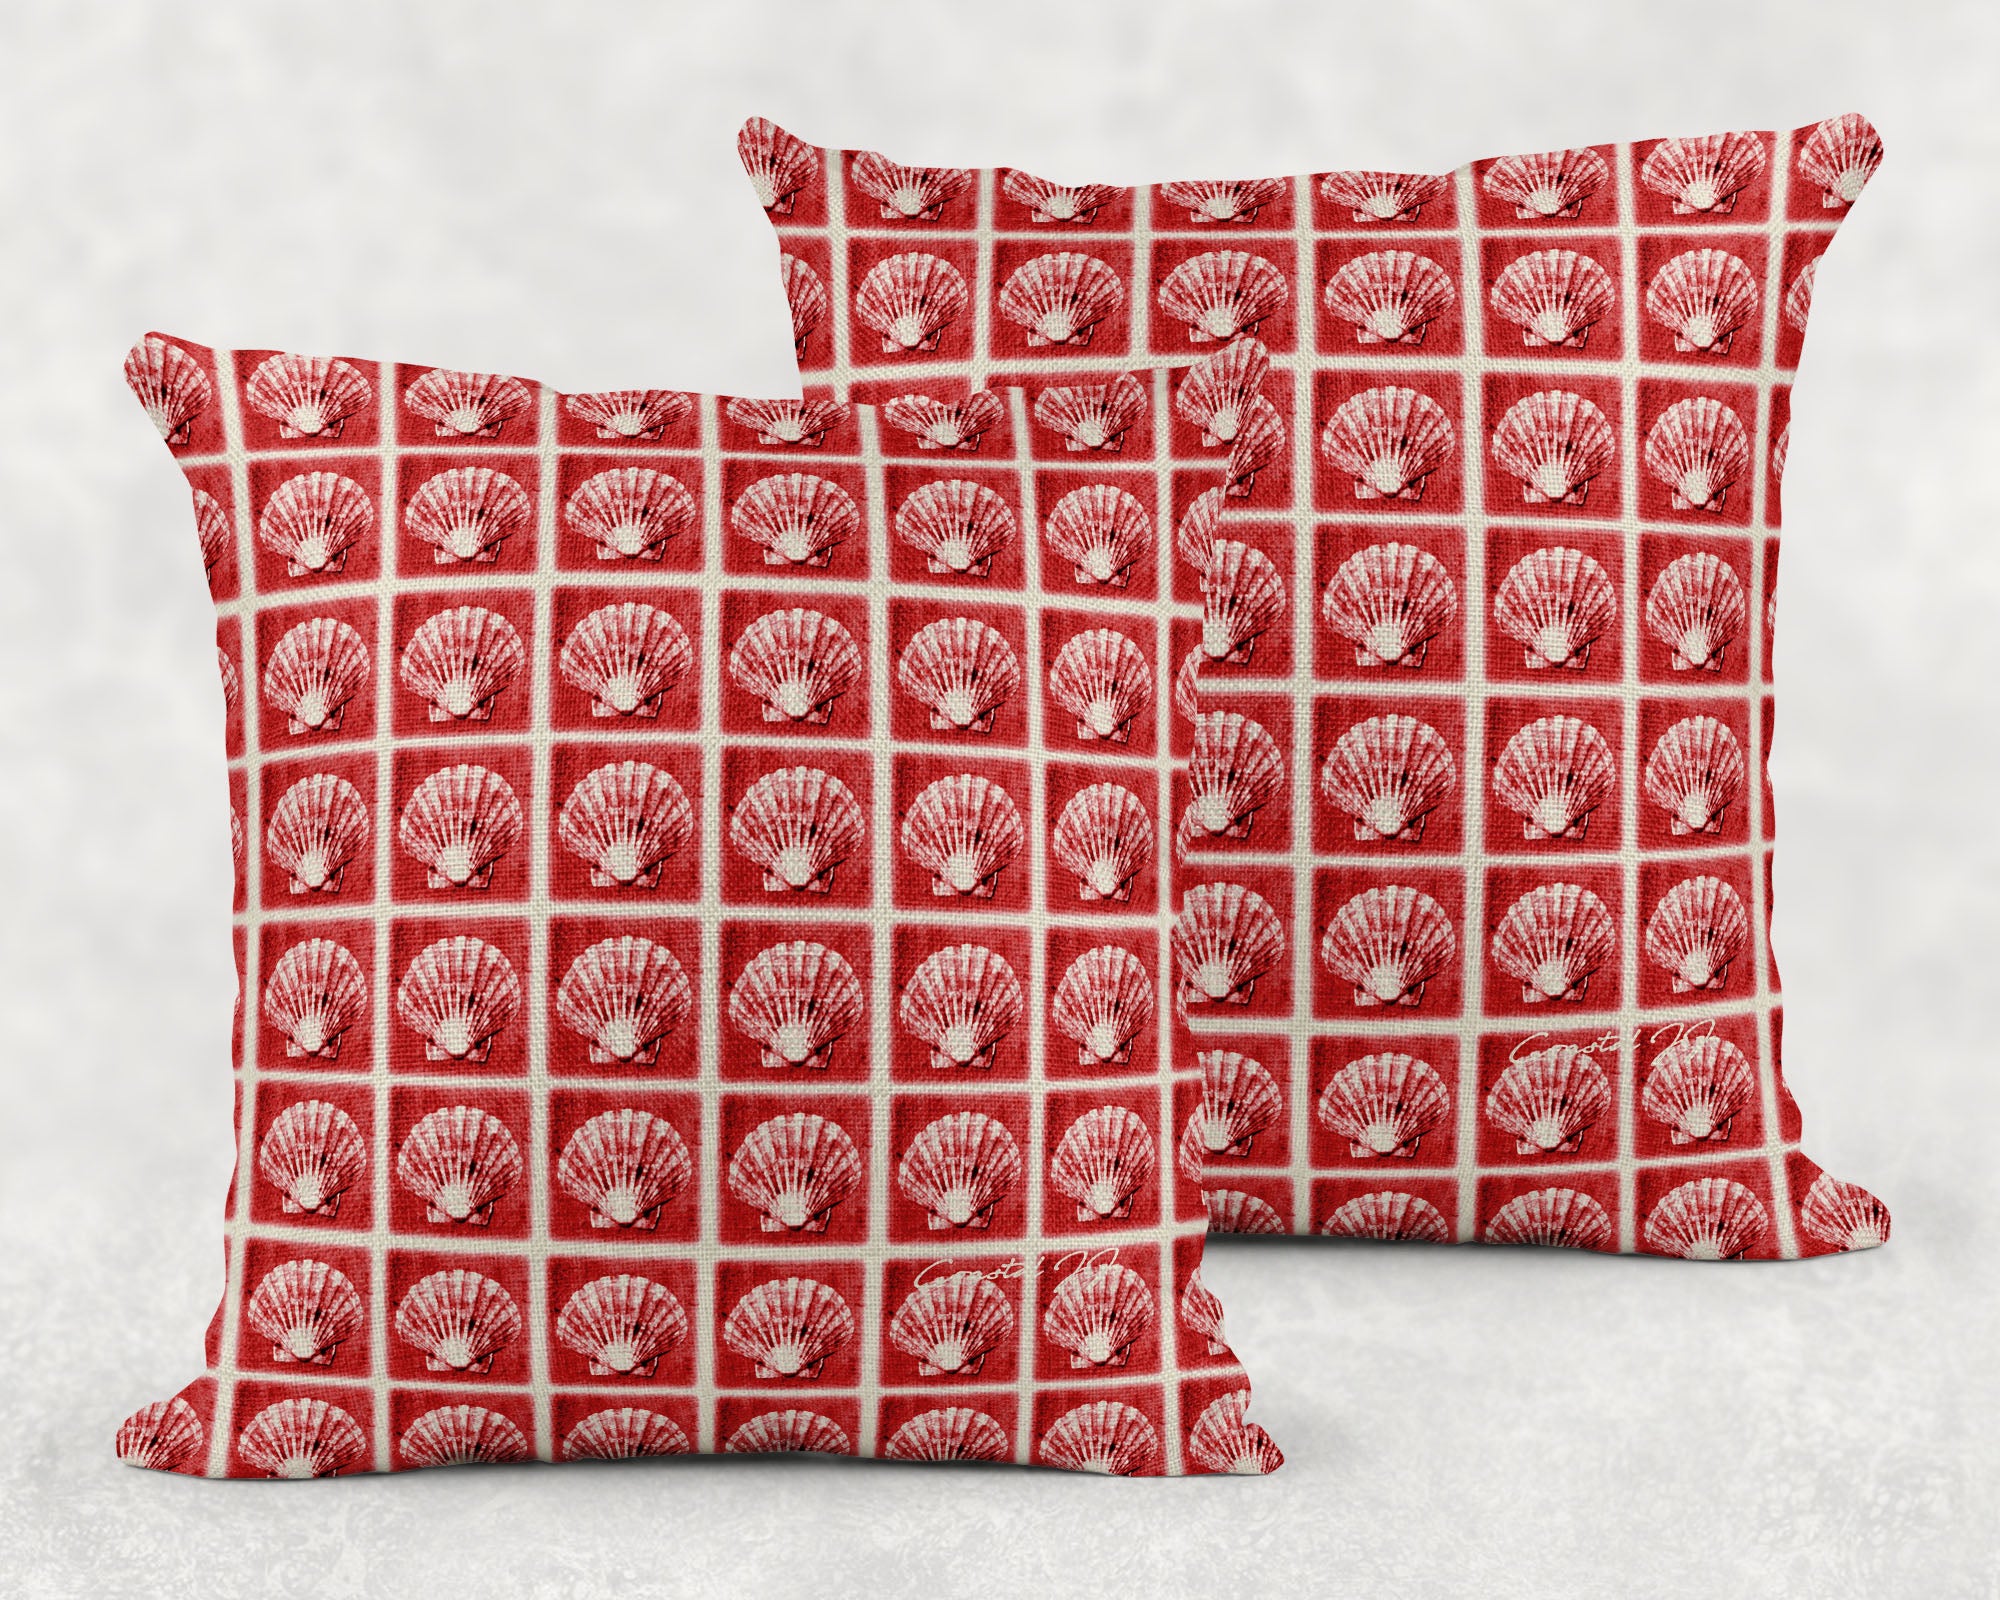 'Selsey Scallops in Miniature' - Large Sofa Cushion